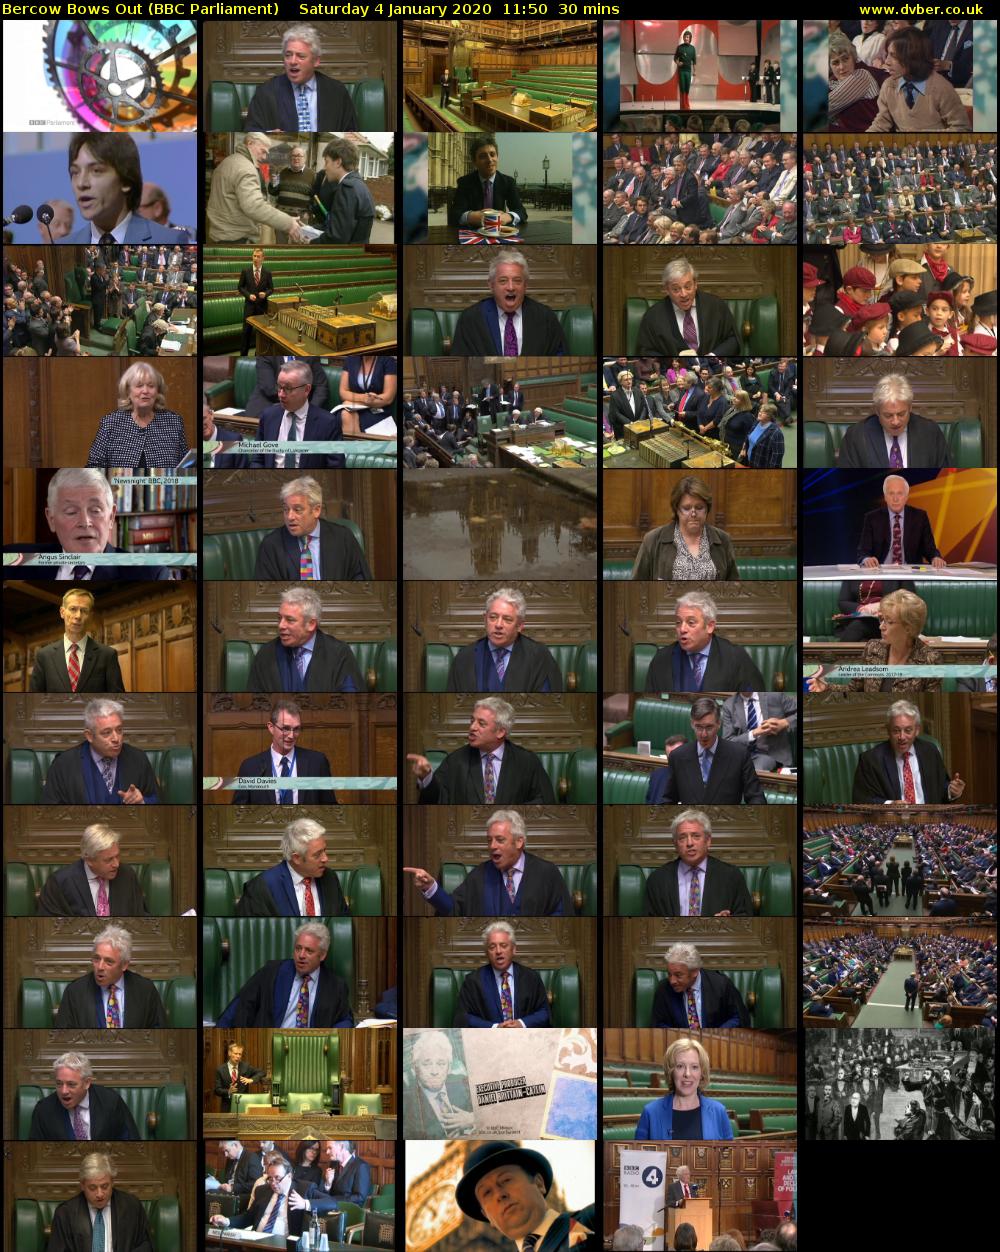 Bercow Bows Out (BBC Parliament) Saturday 4 January 2020 11:50 - 12:20